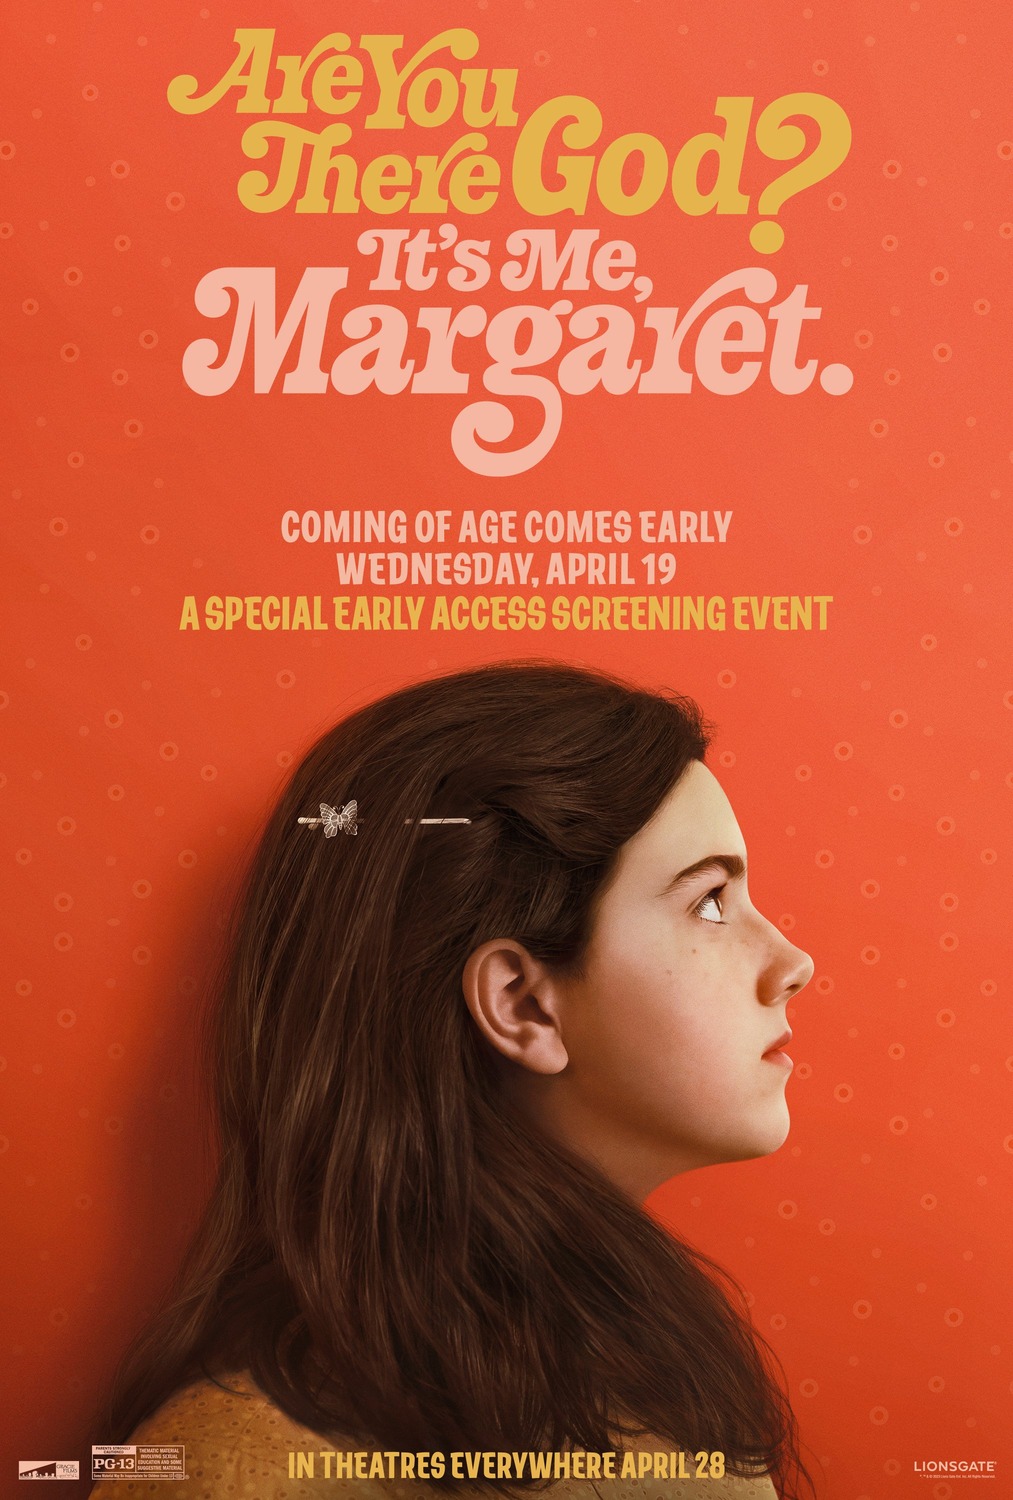 Extra Large Movie Poster Image for Are You There God? It's Me, Margaret. (#3 of 4)